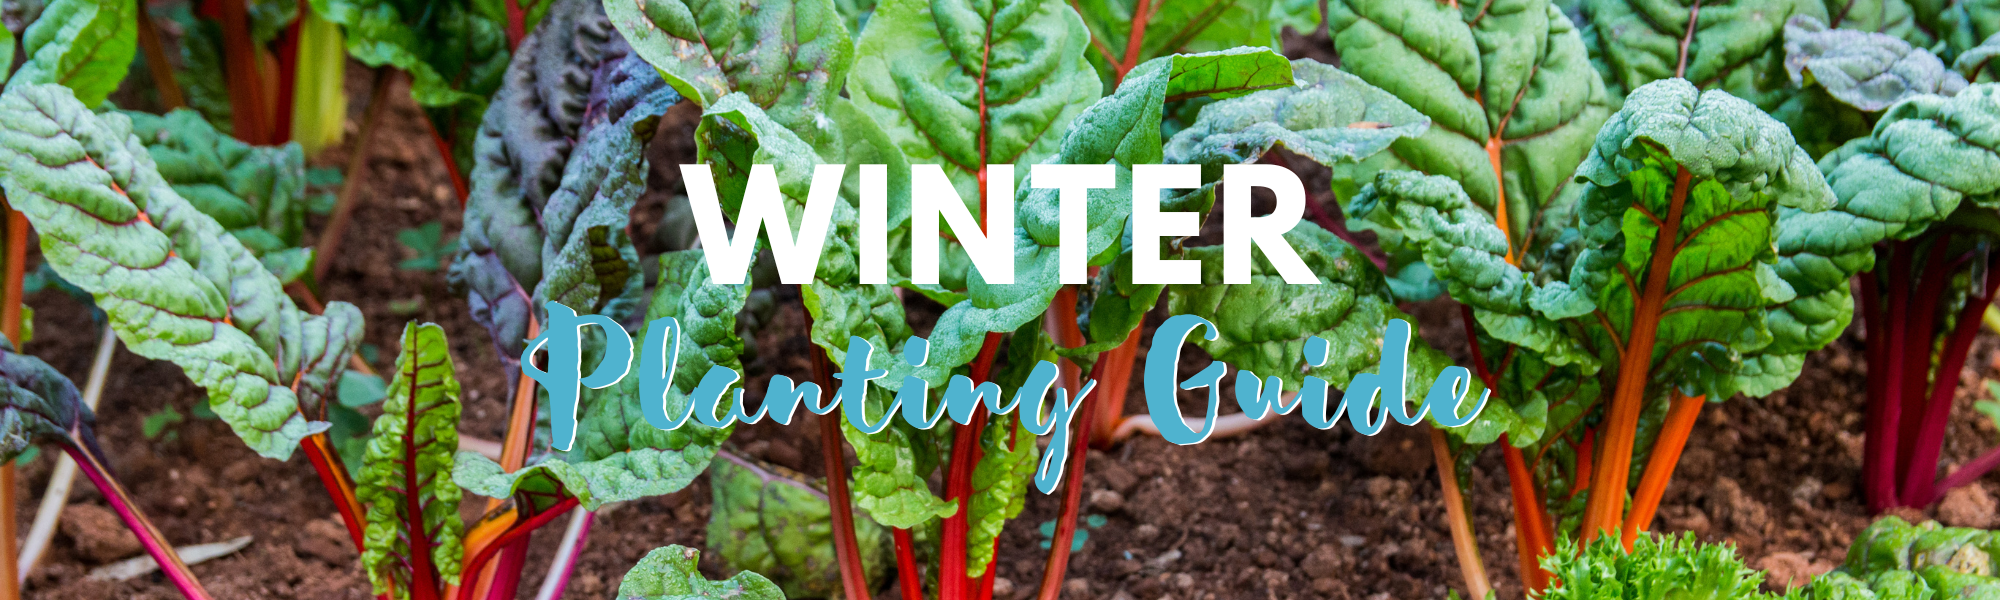 Winter Sowing Guide